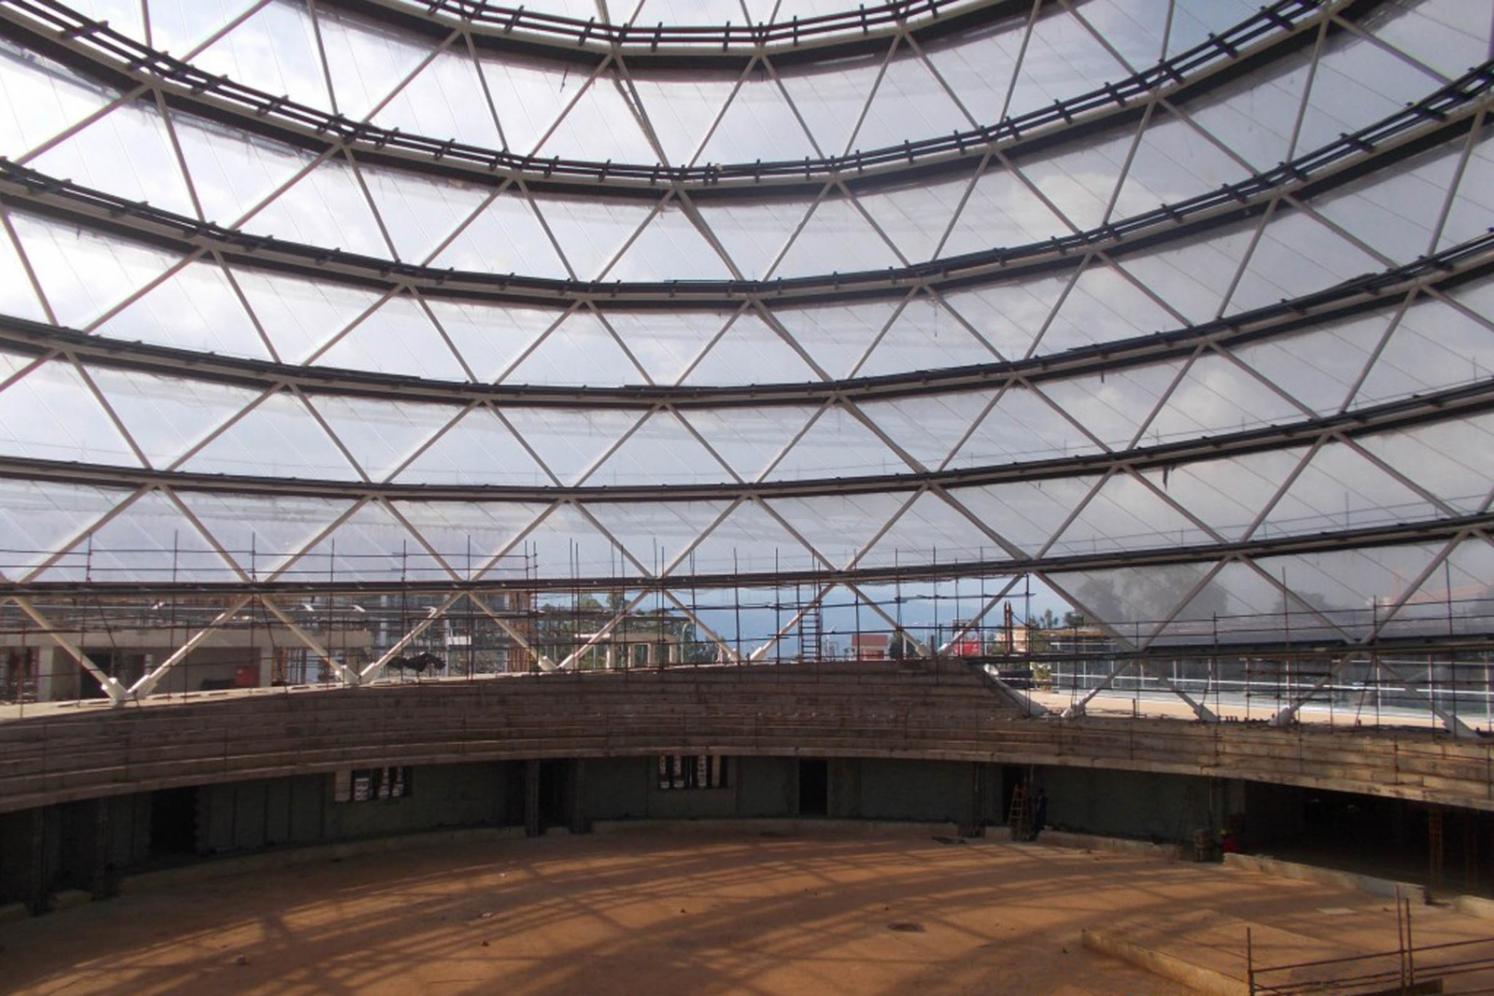 Inside view of dome construction (livingspaces.net)